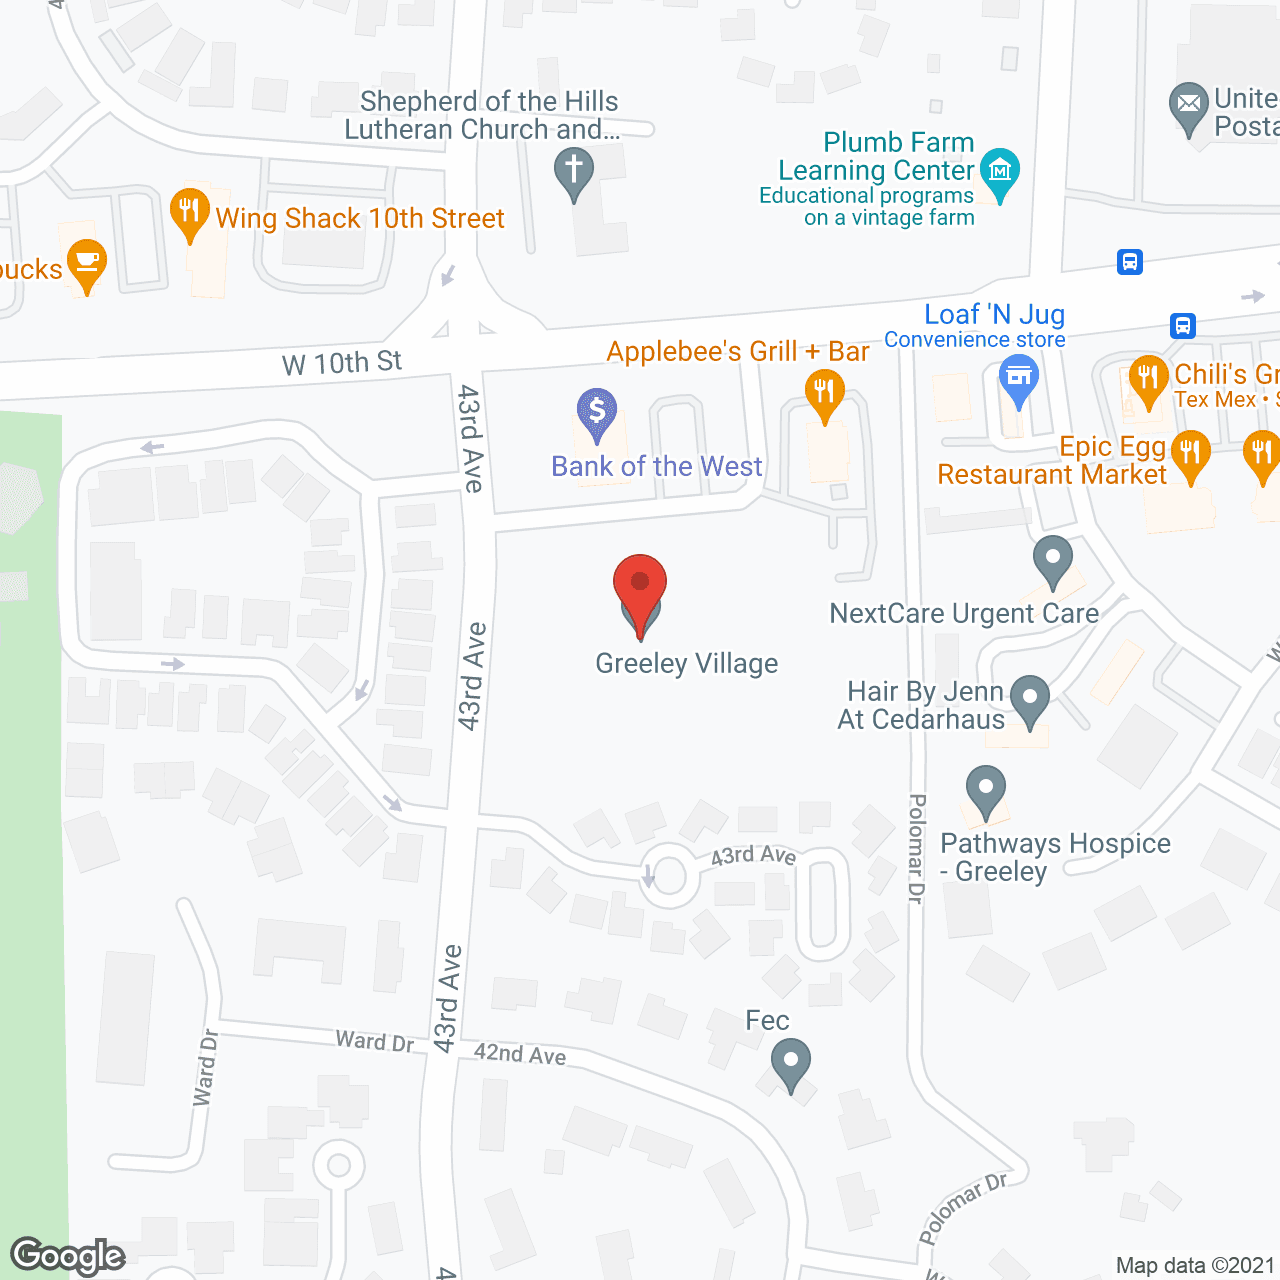 Greeley Village by Cogir in google map